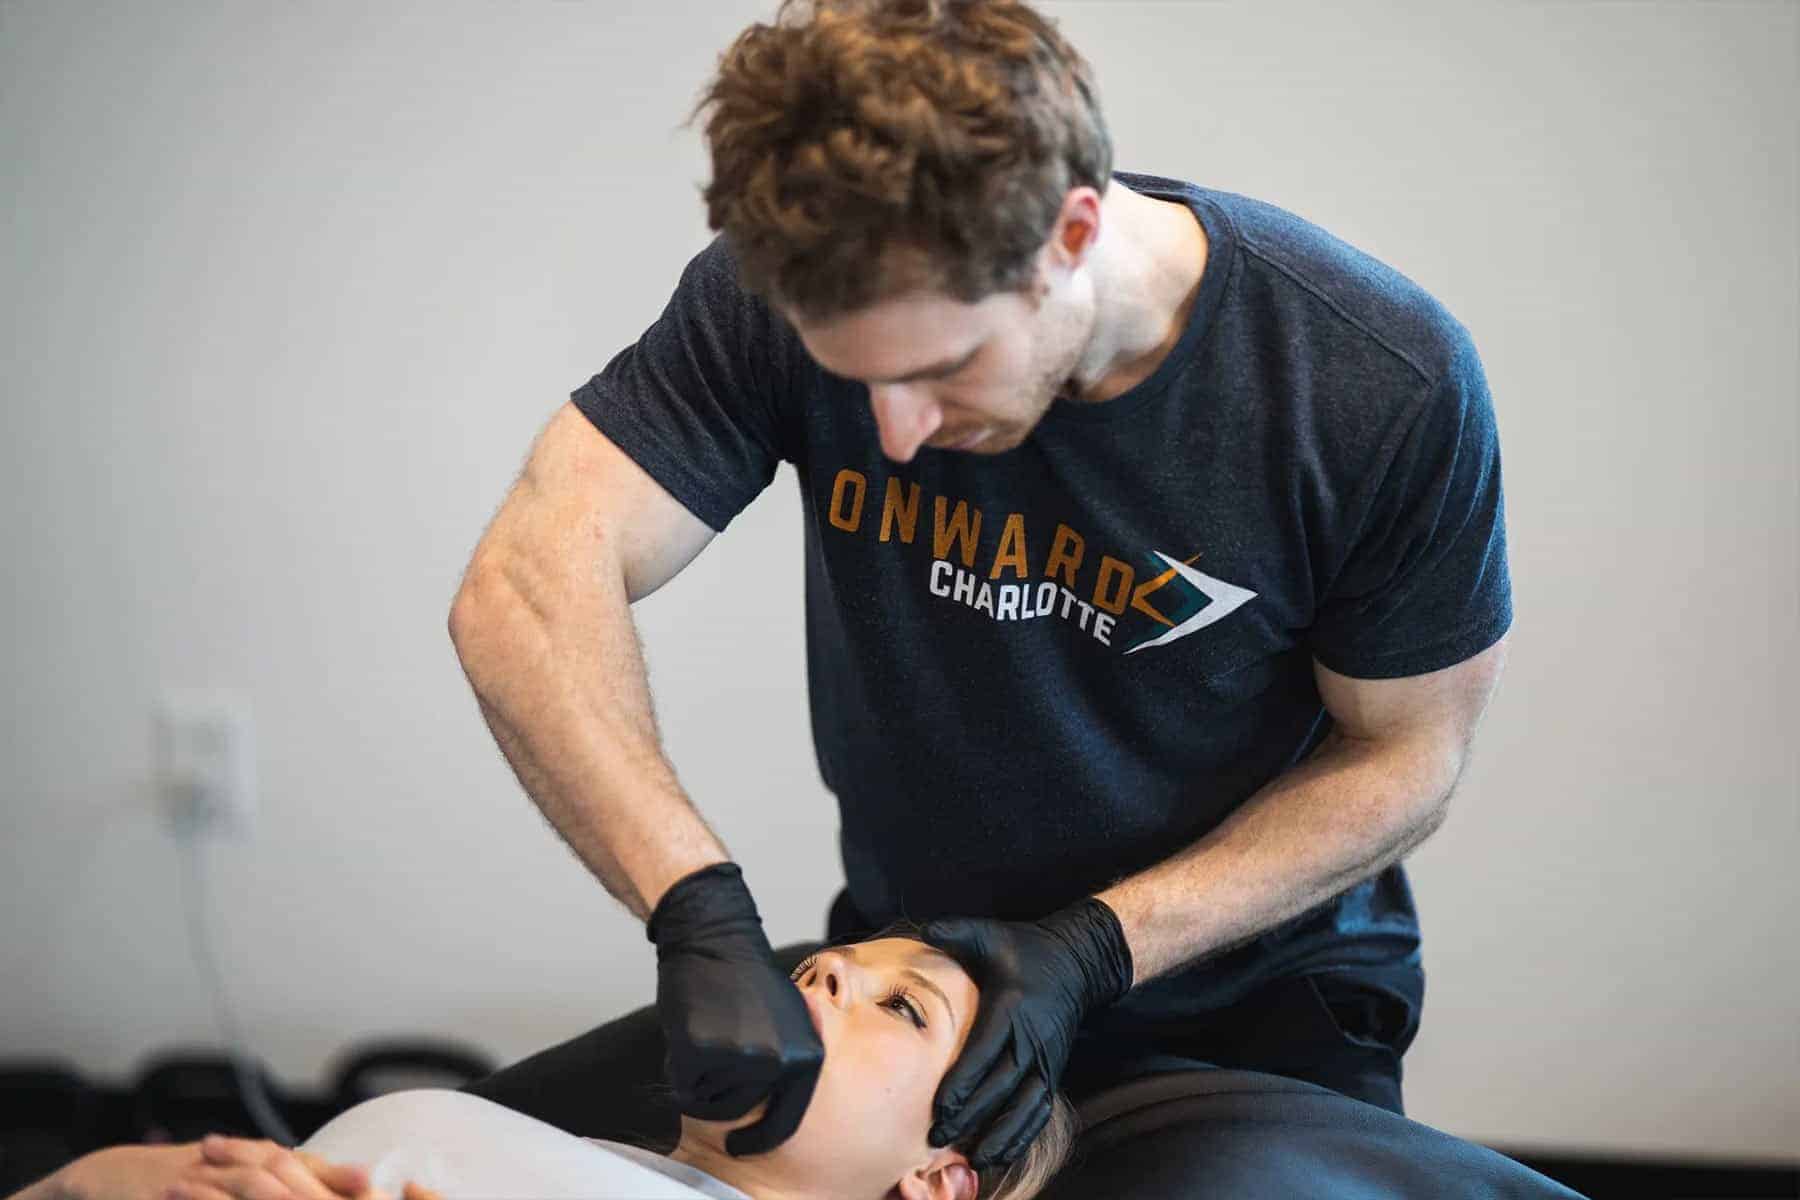 TMJ | Onward Physical Therapy